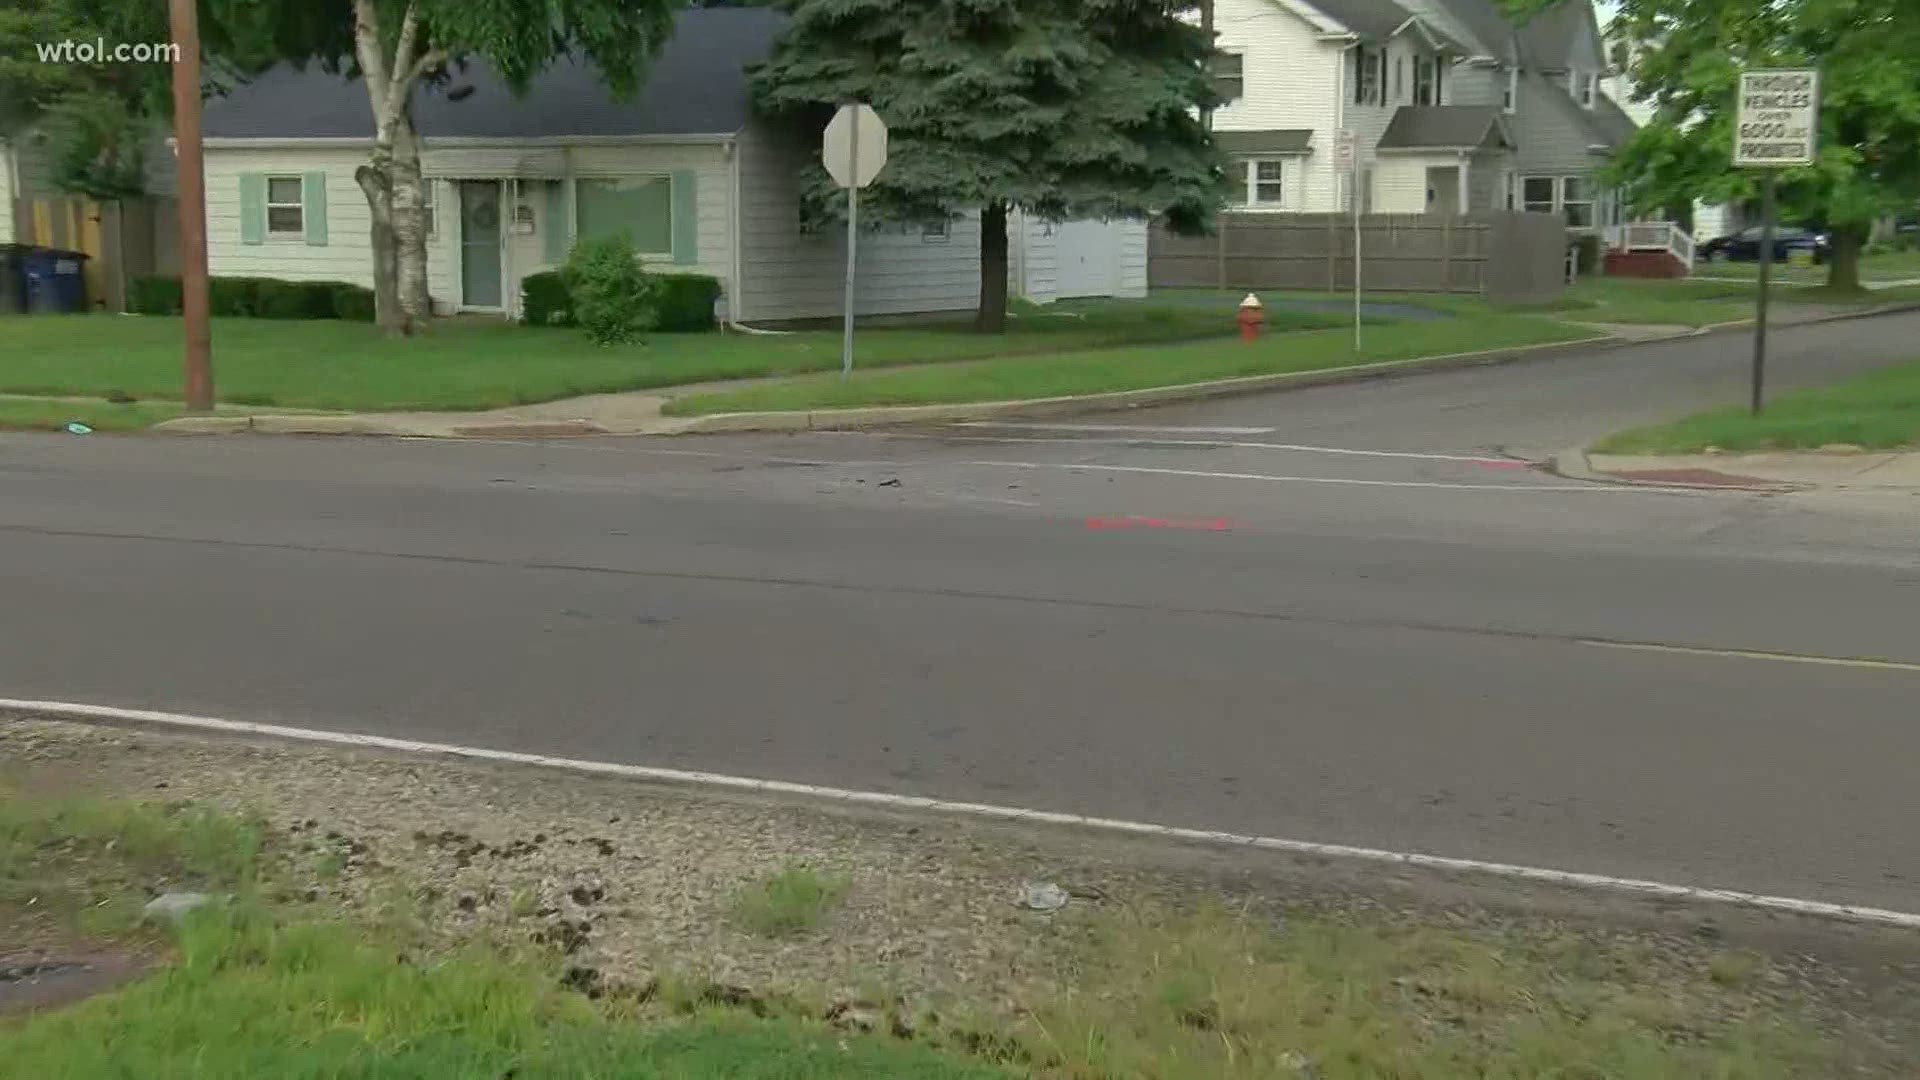 Woman dies after being left at scene of hit-and-run motorcycle crash in west Toledo